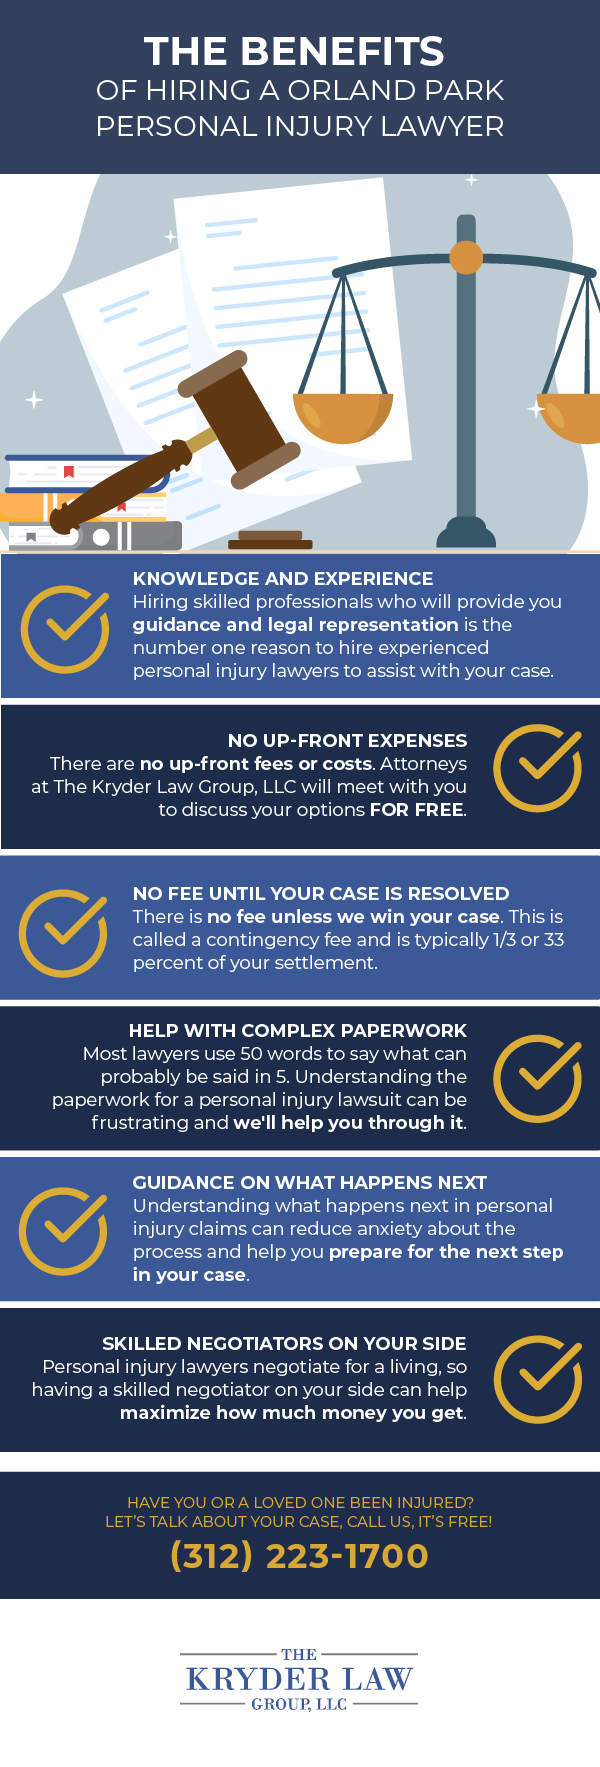 The Benefits of Hiring an Orland Park Personal Injury Lawyer Infographic